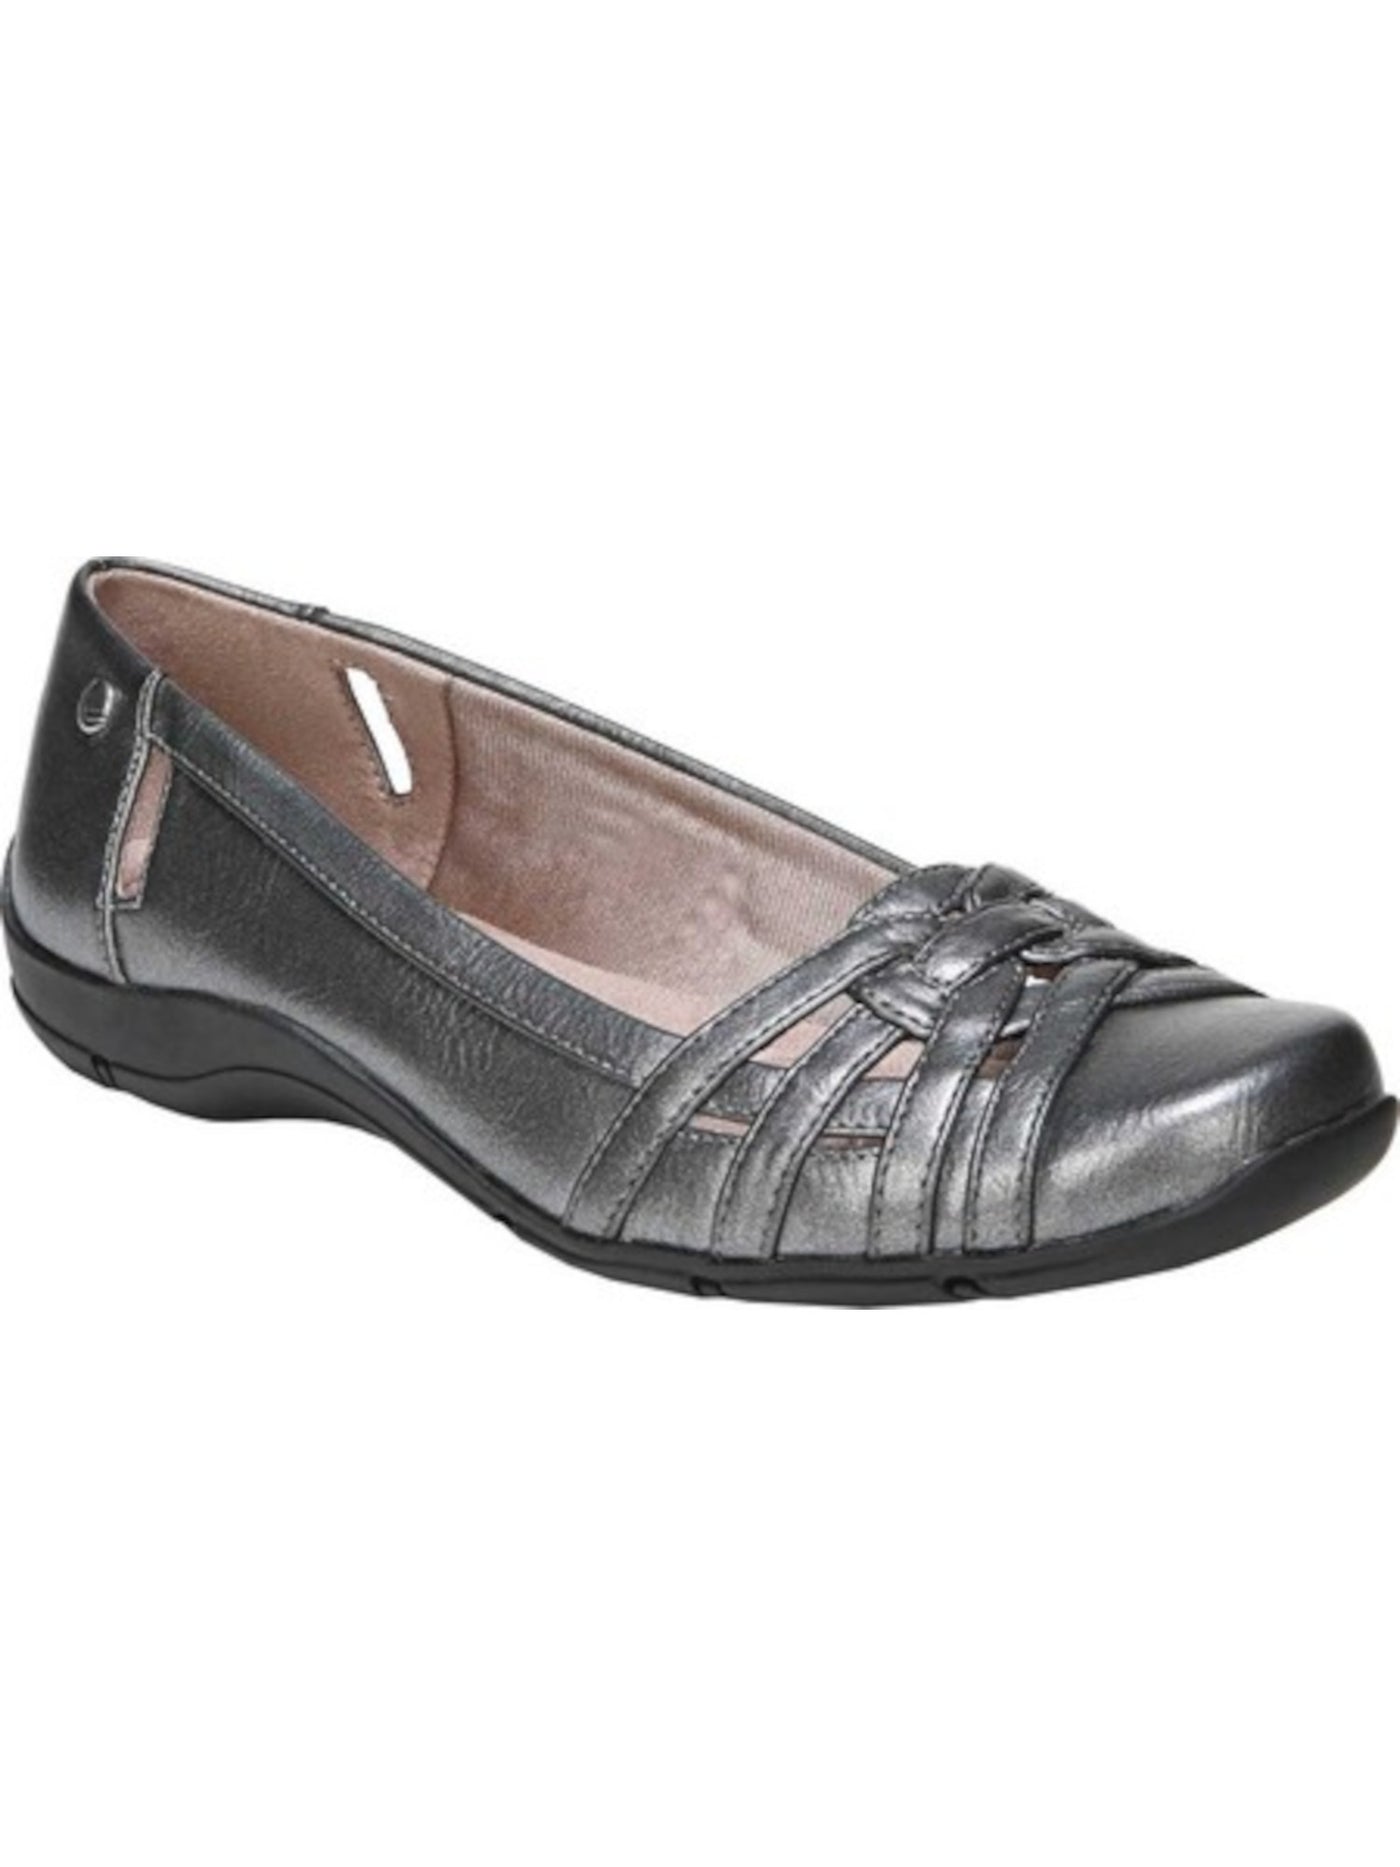 LIFE STRIDE Womens Silver Studded Open Detailing At Heel Cushioned Woven Diverse Round Toe Wedge Slip On Flats 6.5 M